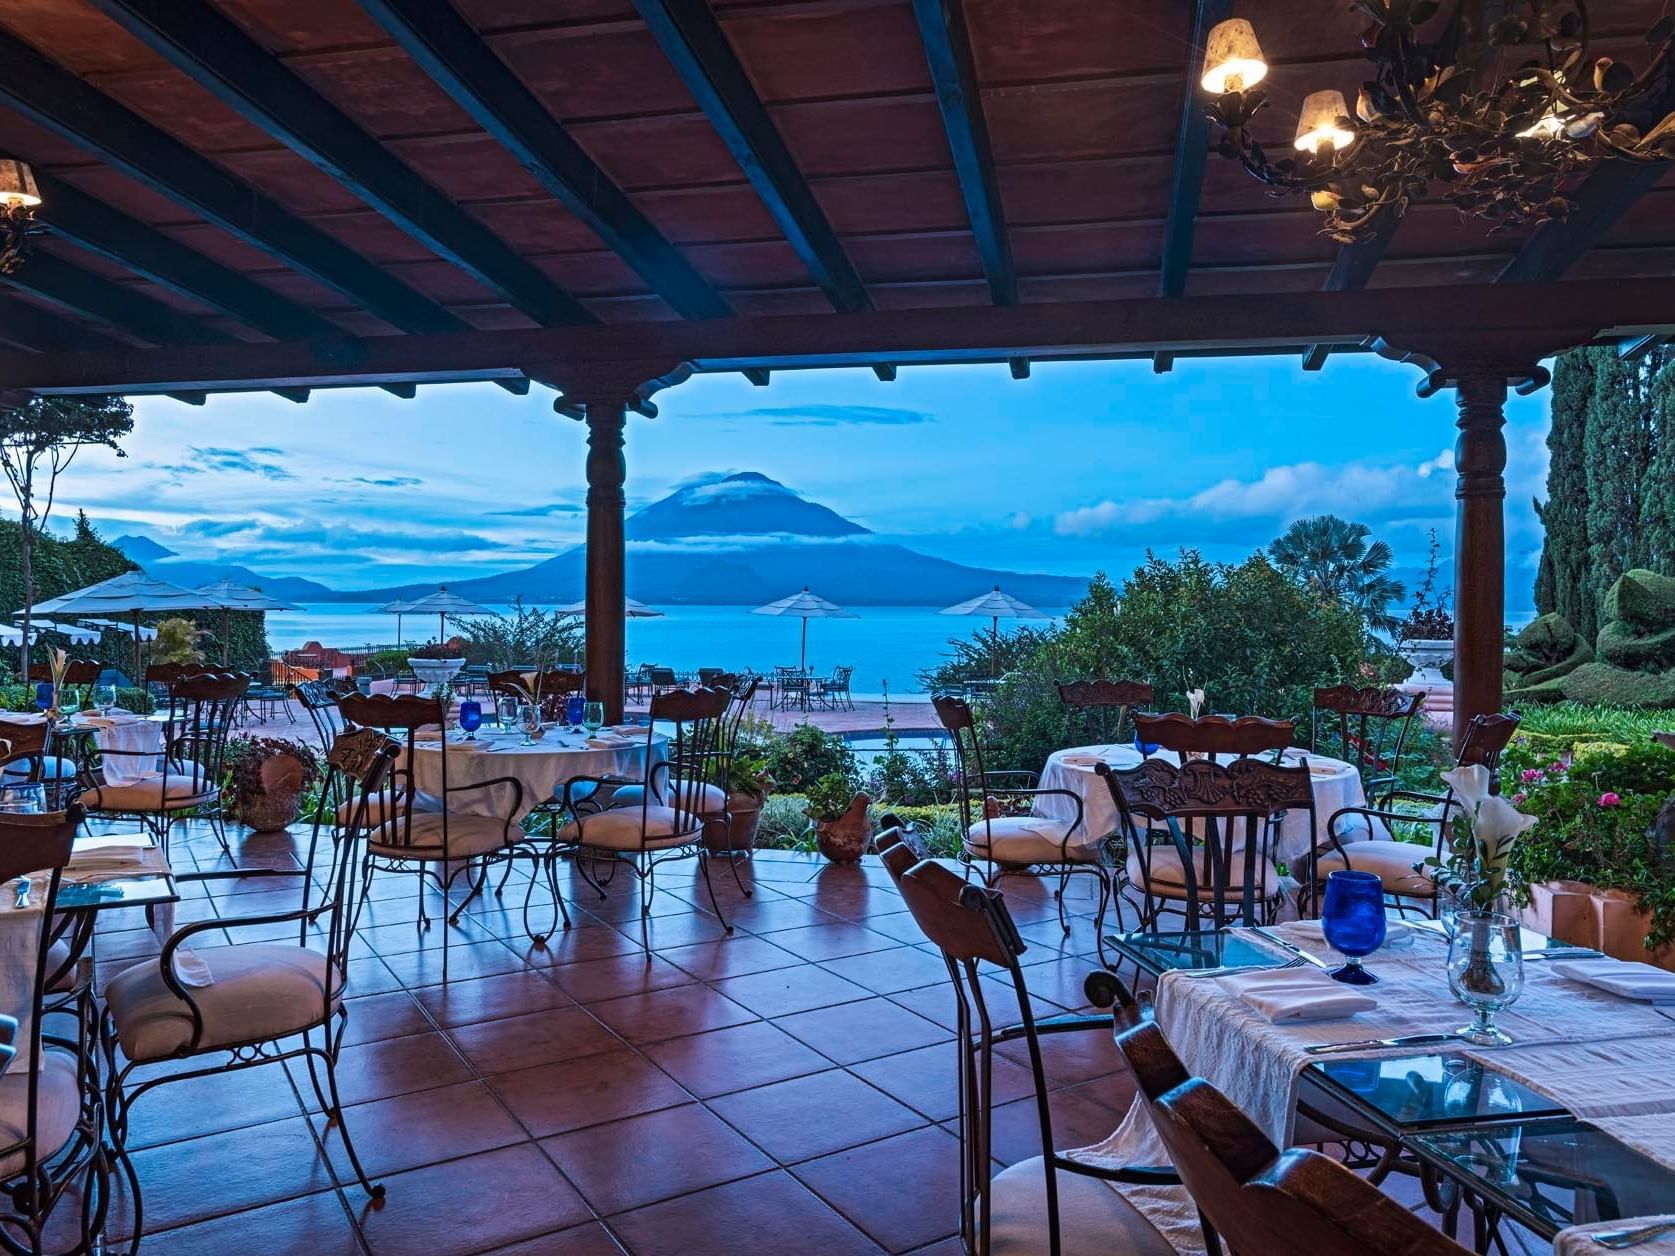 Dining area with lake view in Atitlán Restaurant, Hotel Atitlan